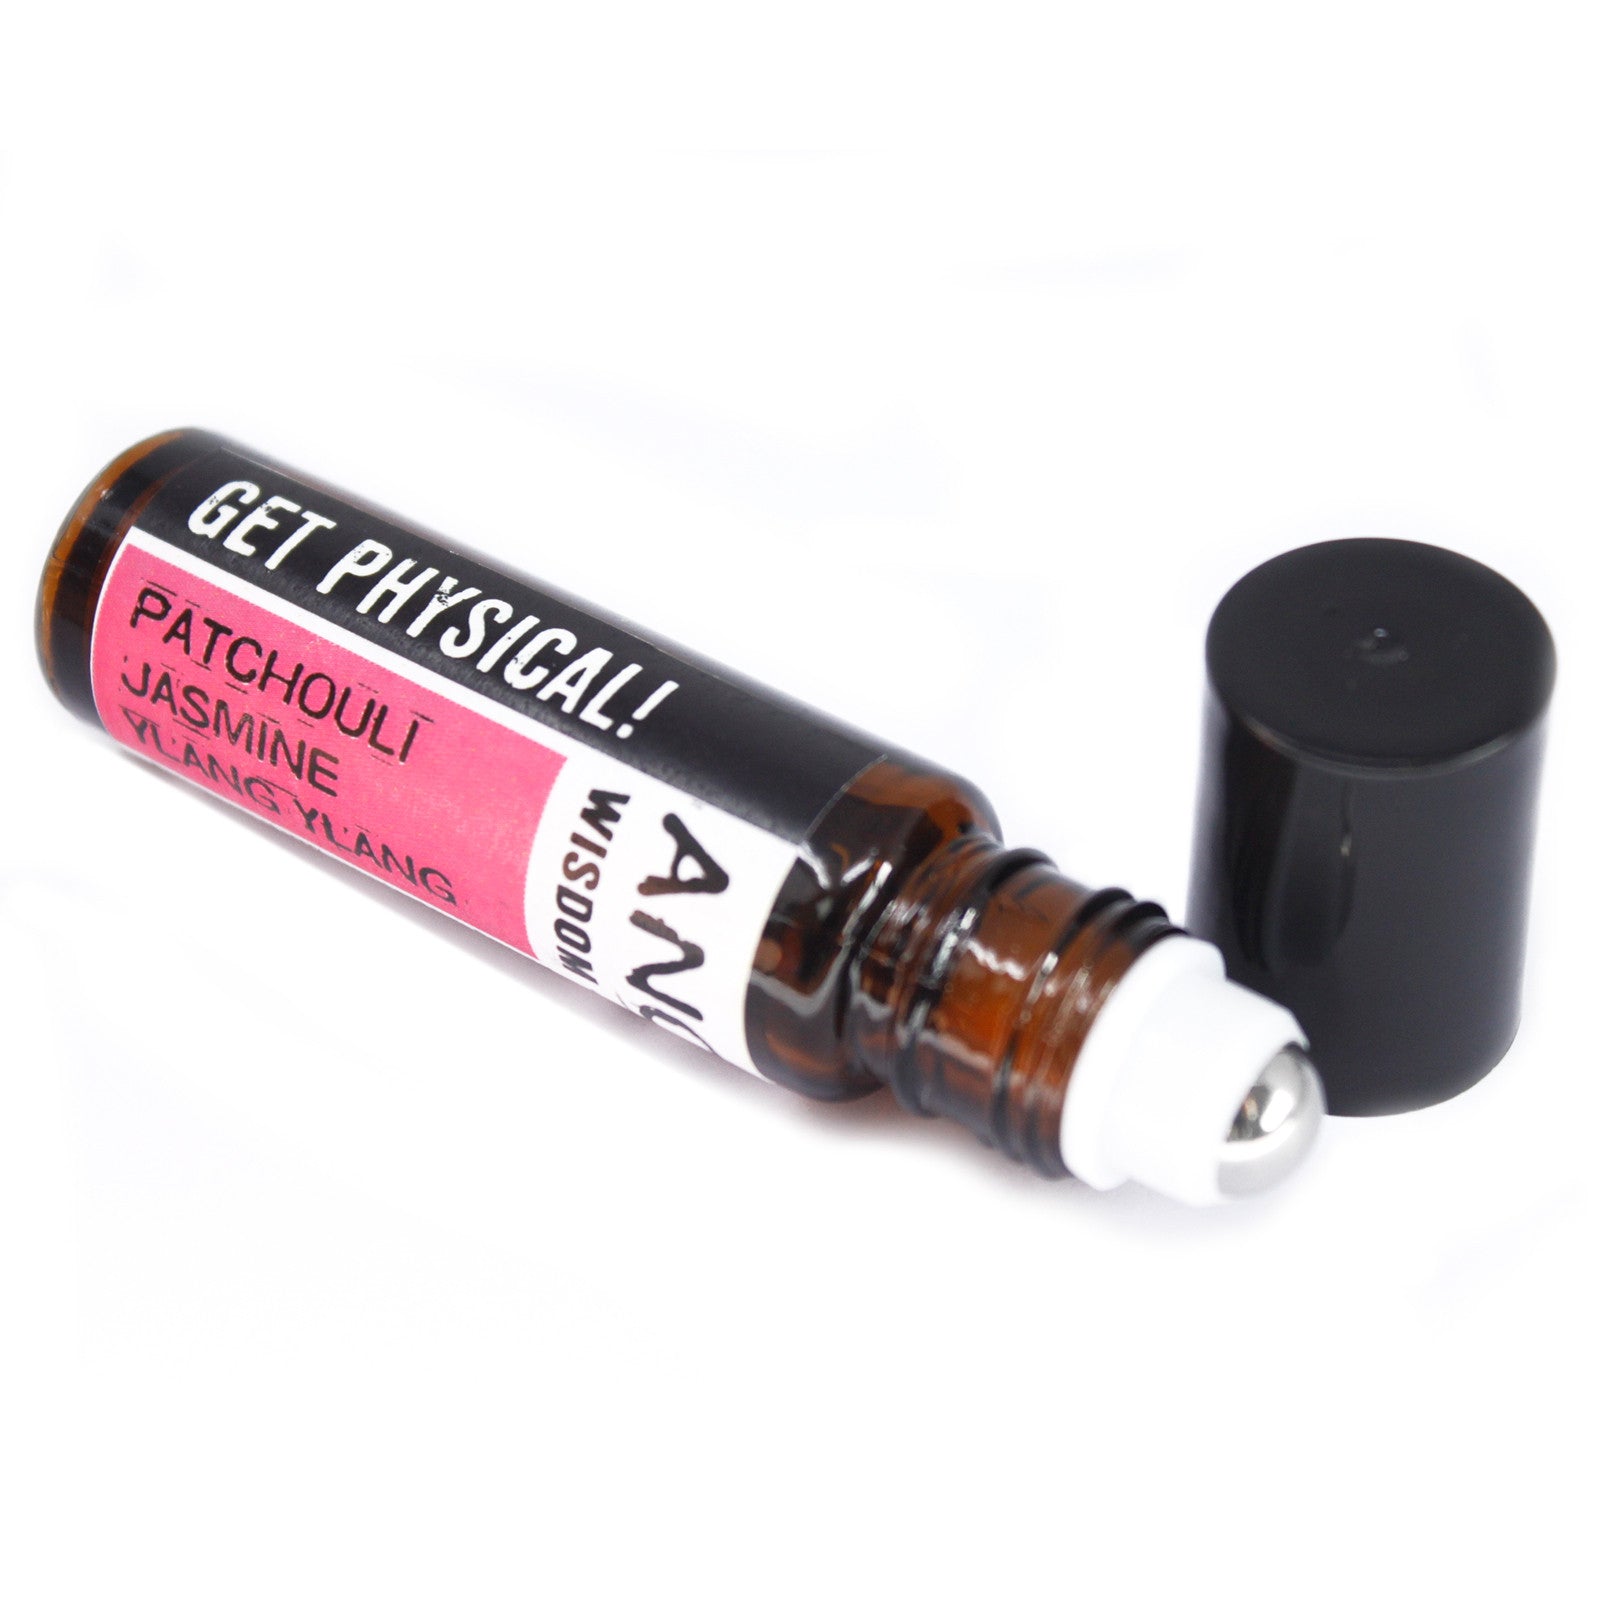 Roll On Essential Oil Blend 10ml - Get Physical!